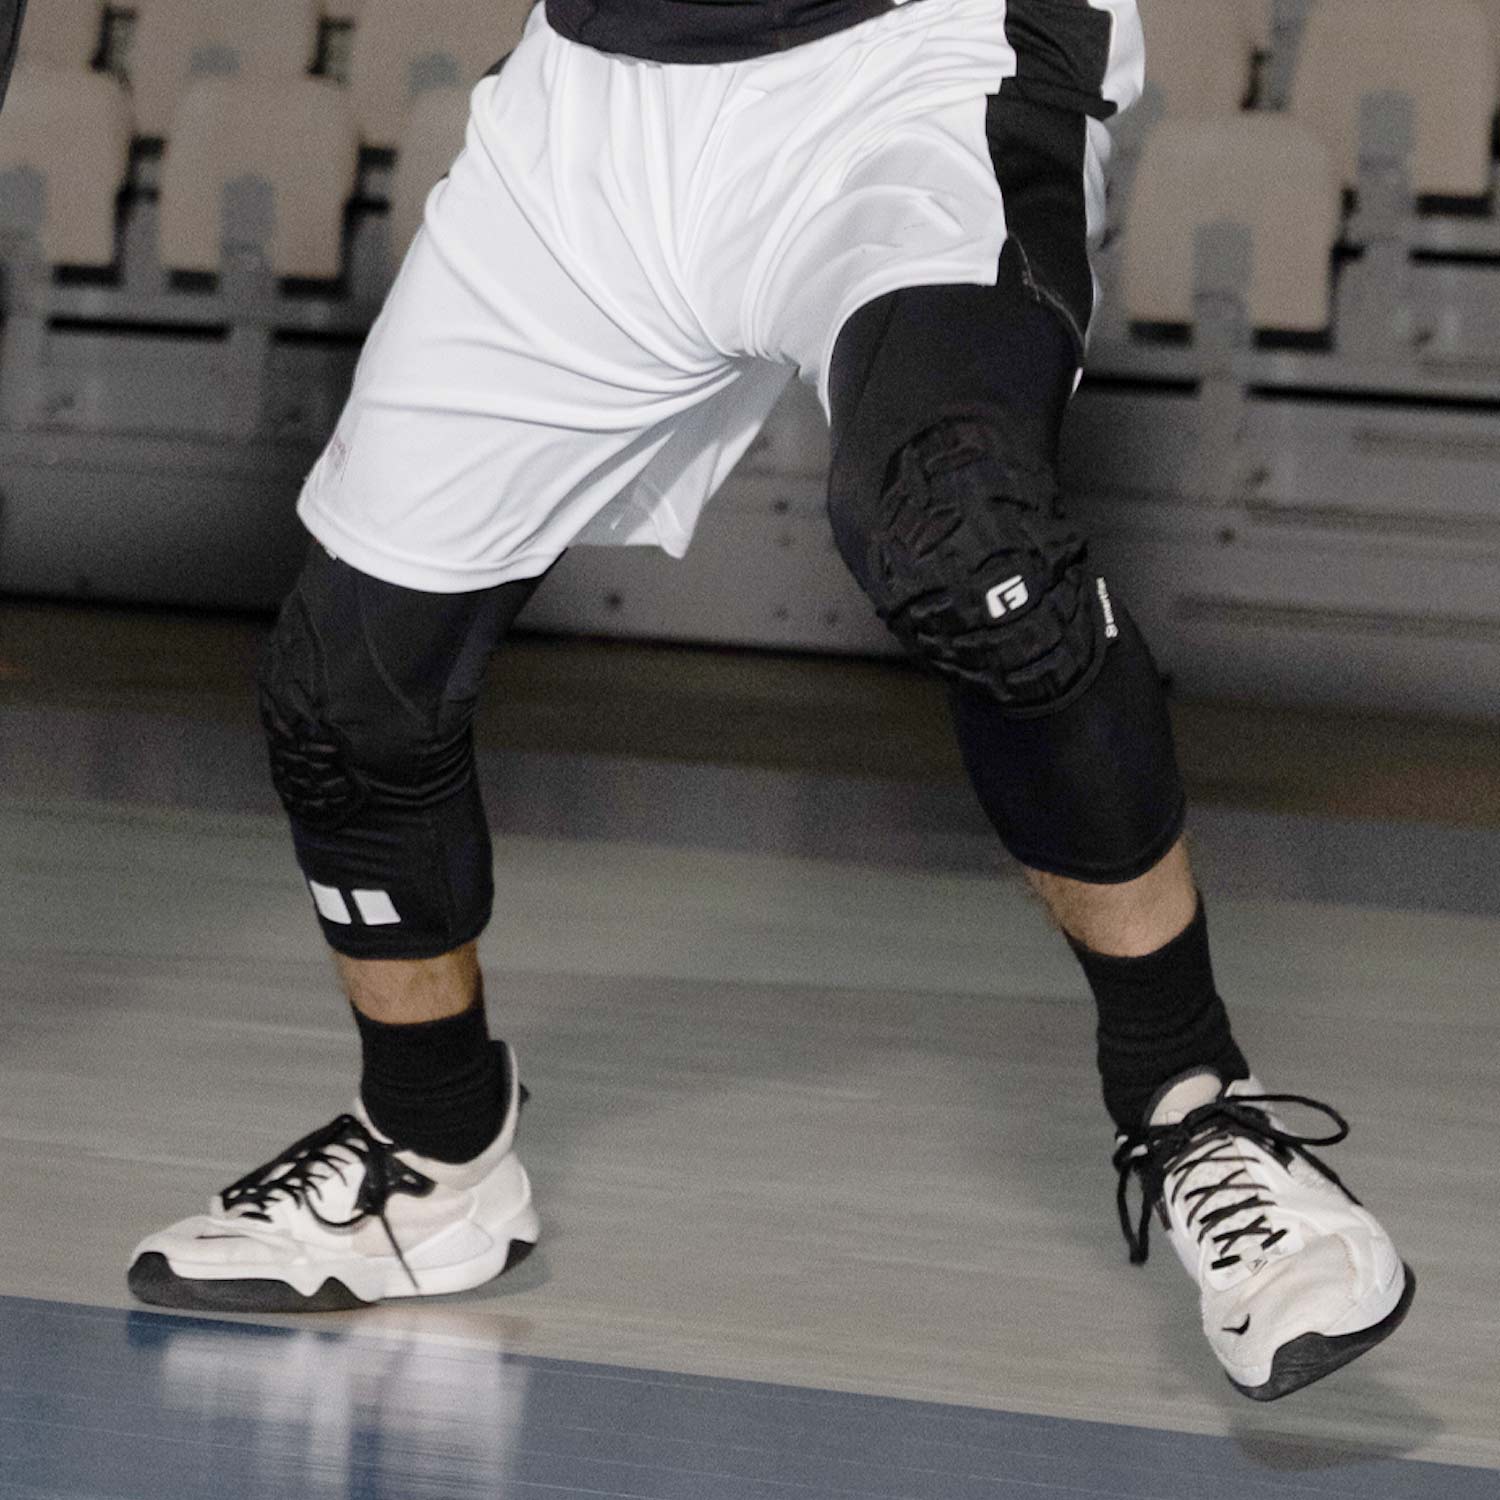 Under Armour Men's Full Length Basketball Tights with Padded Knee  Protection, Adult Sizes